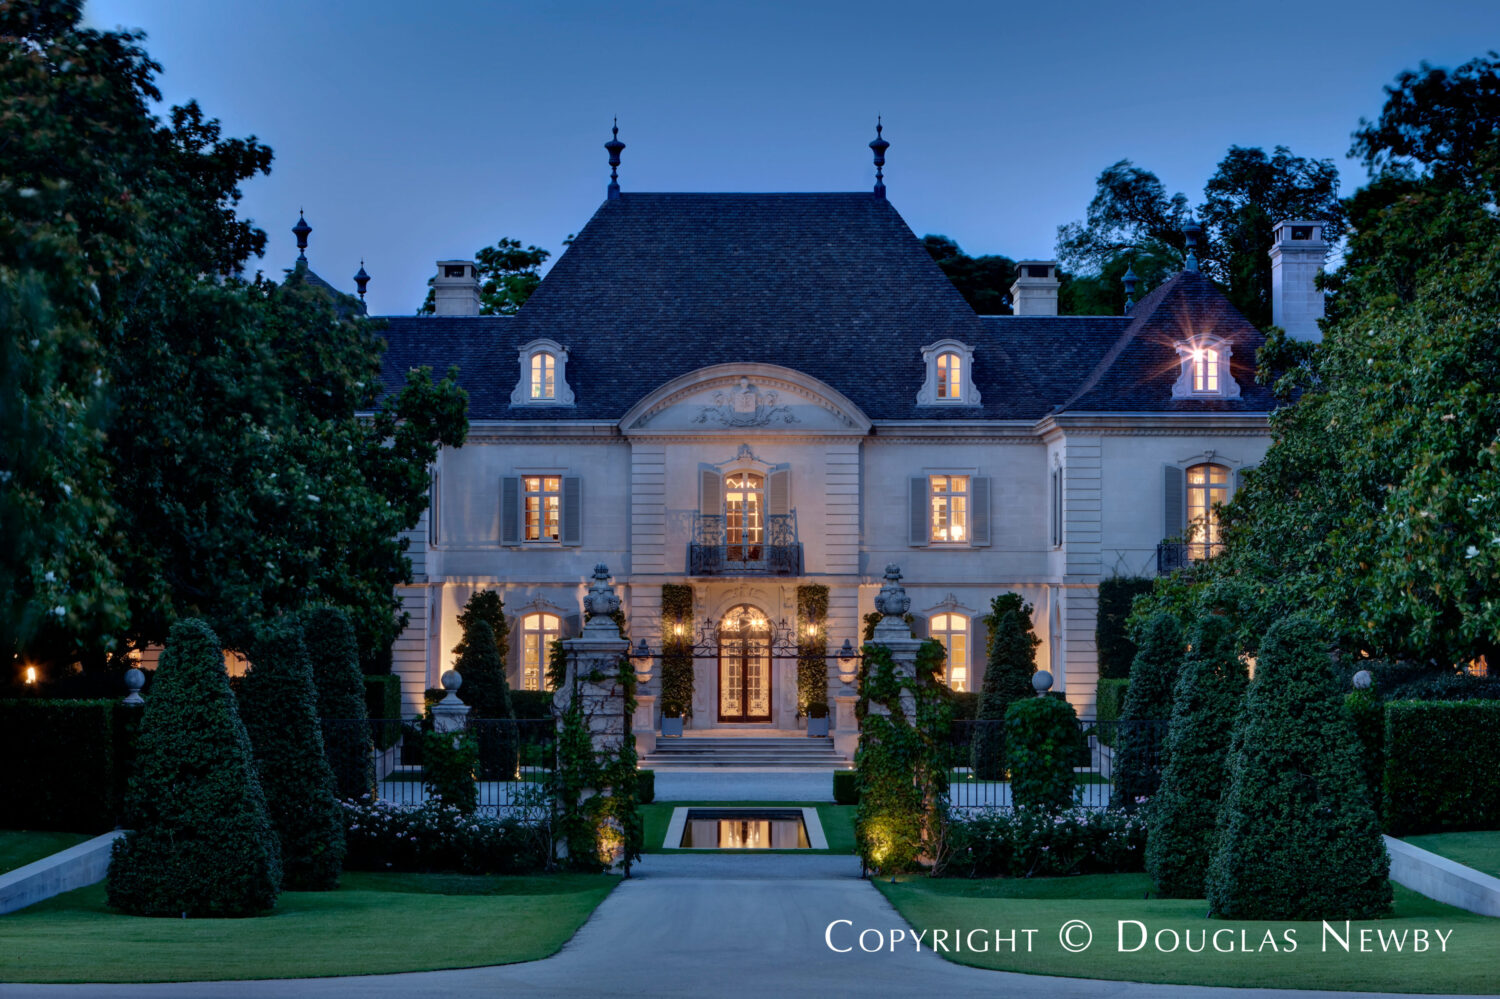 Architect Maurice Fatio designed this French style home in 1939 in Preston Hollow.
